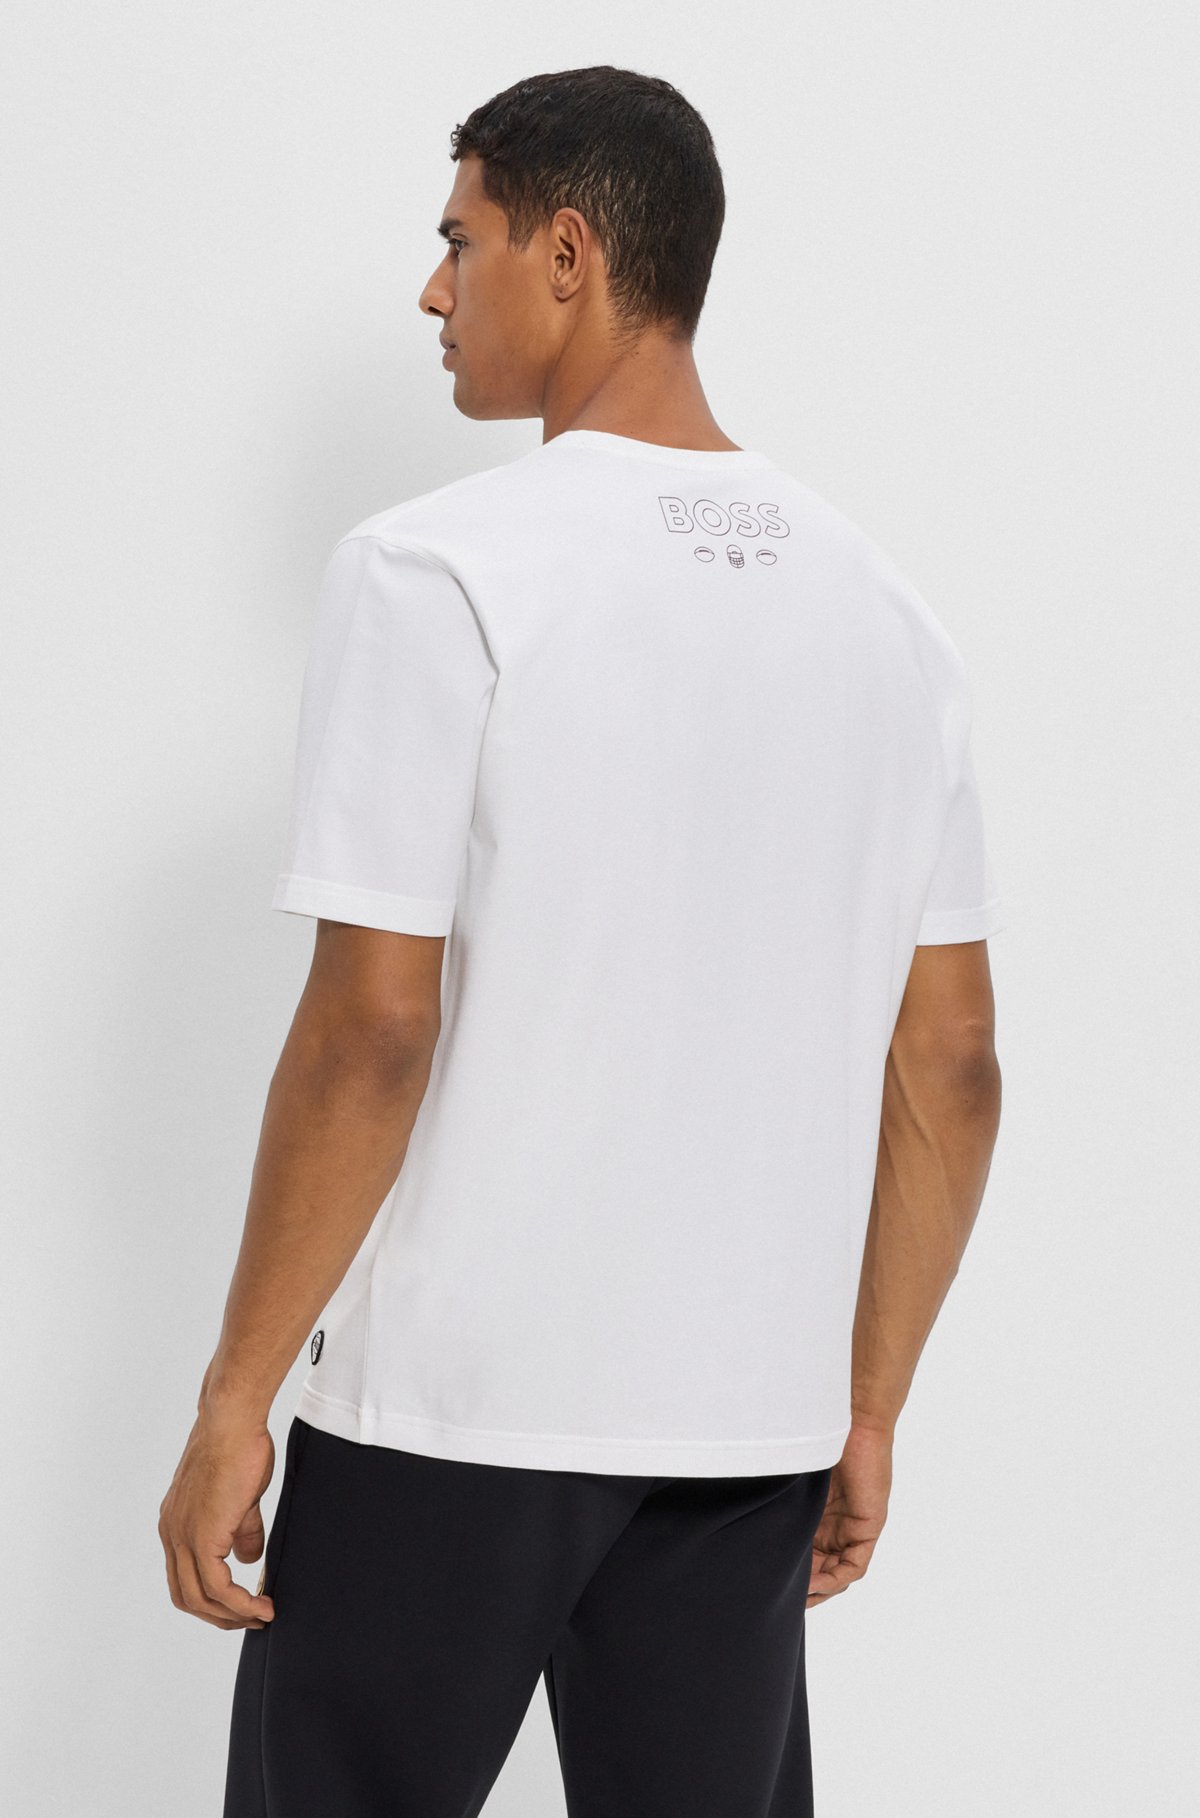  BOSS x NFL stretch-cotton T-shirt with collaborative branding, Commanders